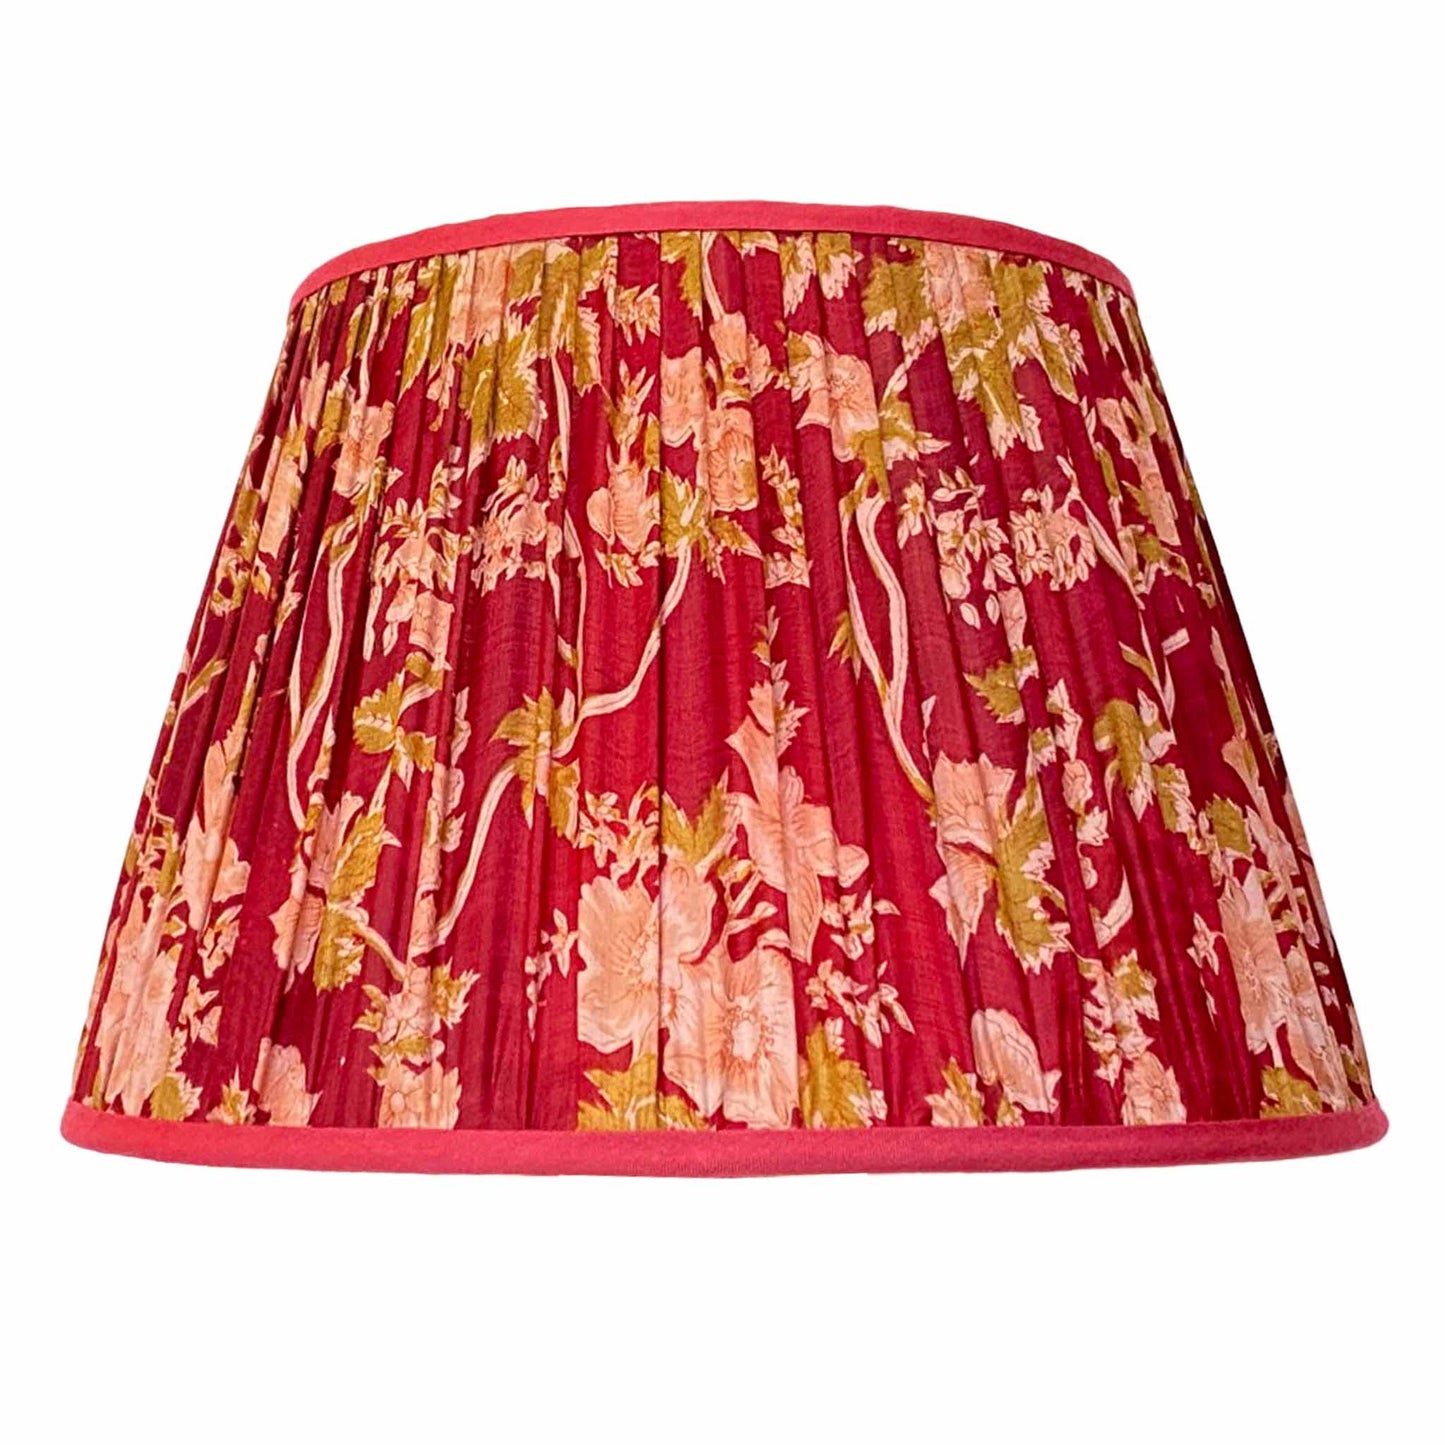 Raspberry and chartreuse vintage silk lampshade cutout